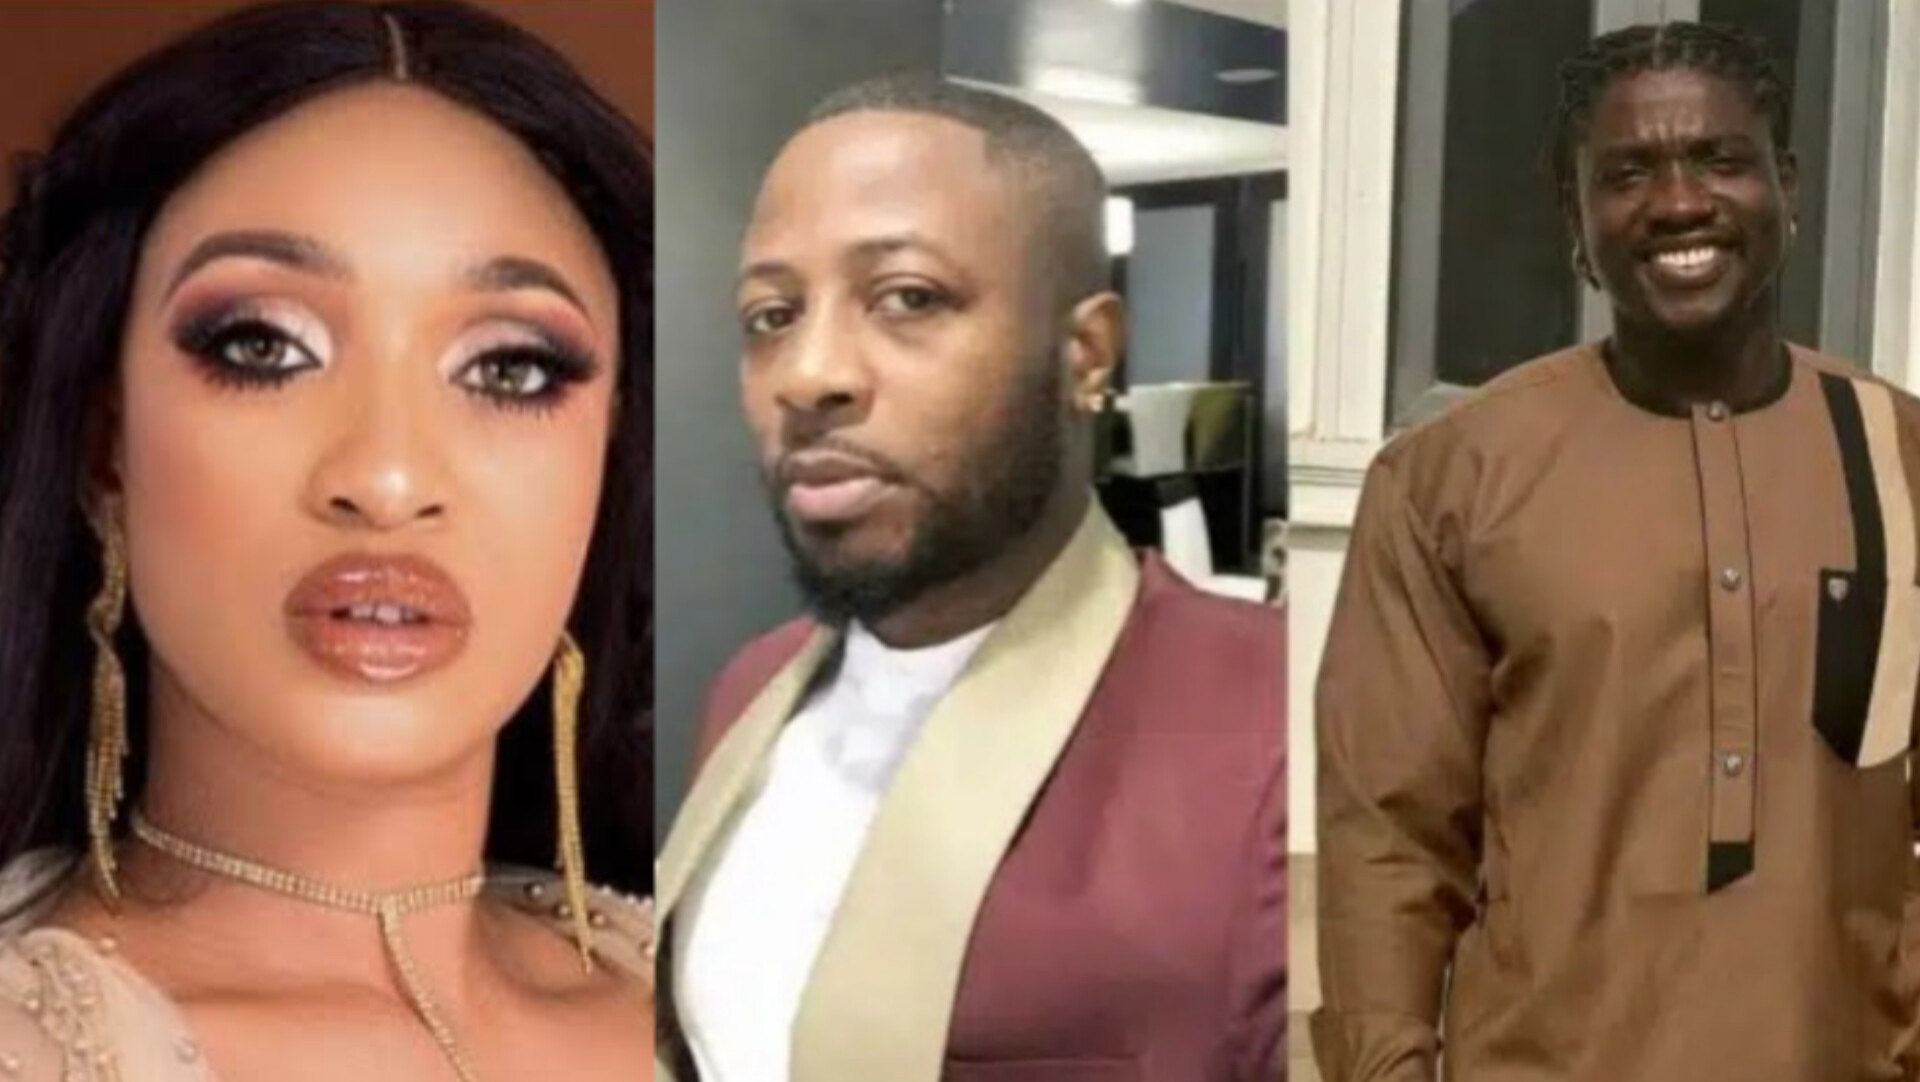 "Tonto Dikeh Drags Tunde Ednut for Posting VeryDarkman’s Release from Custody, Branding Him a 'Horrible Human'"